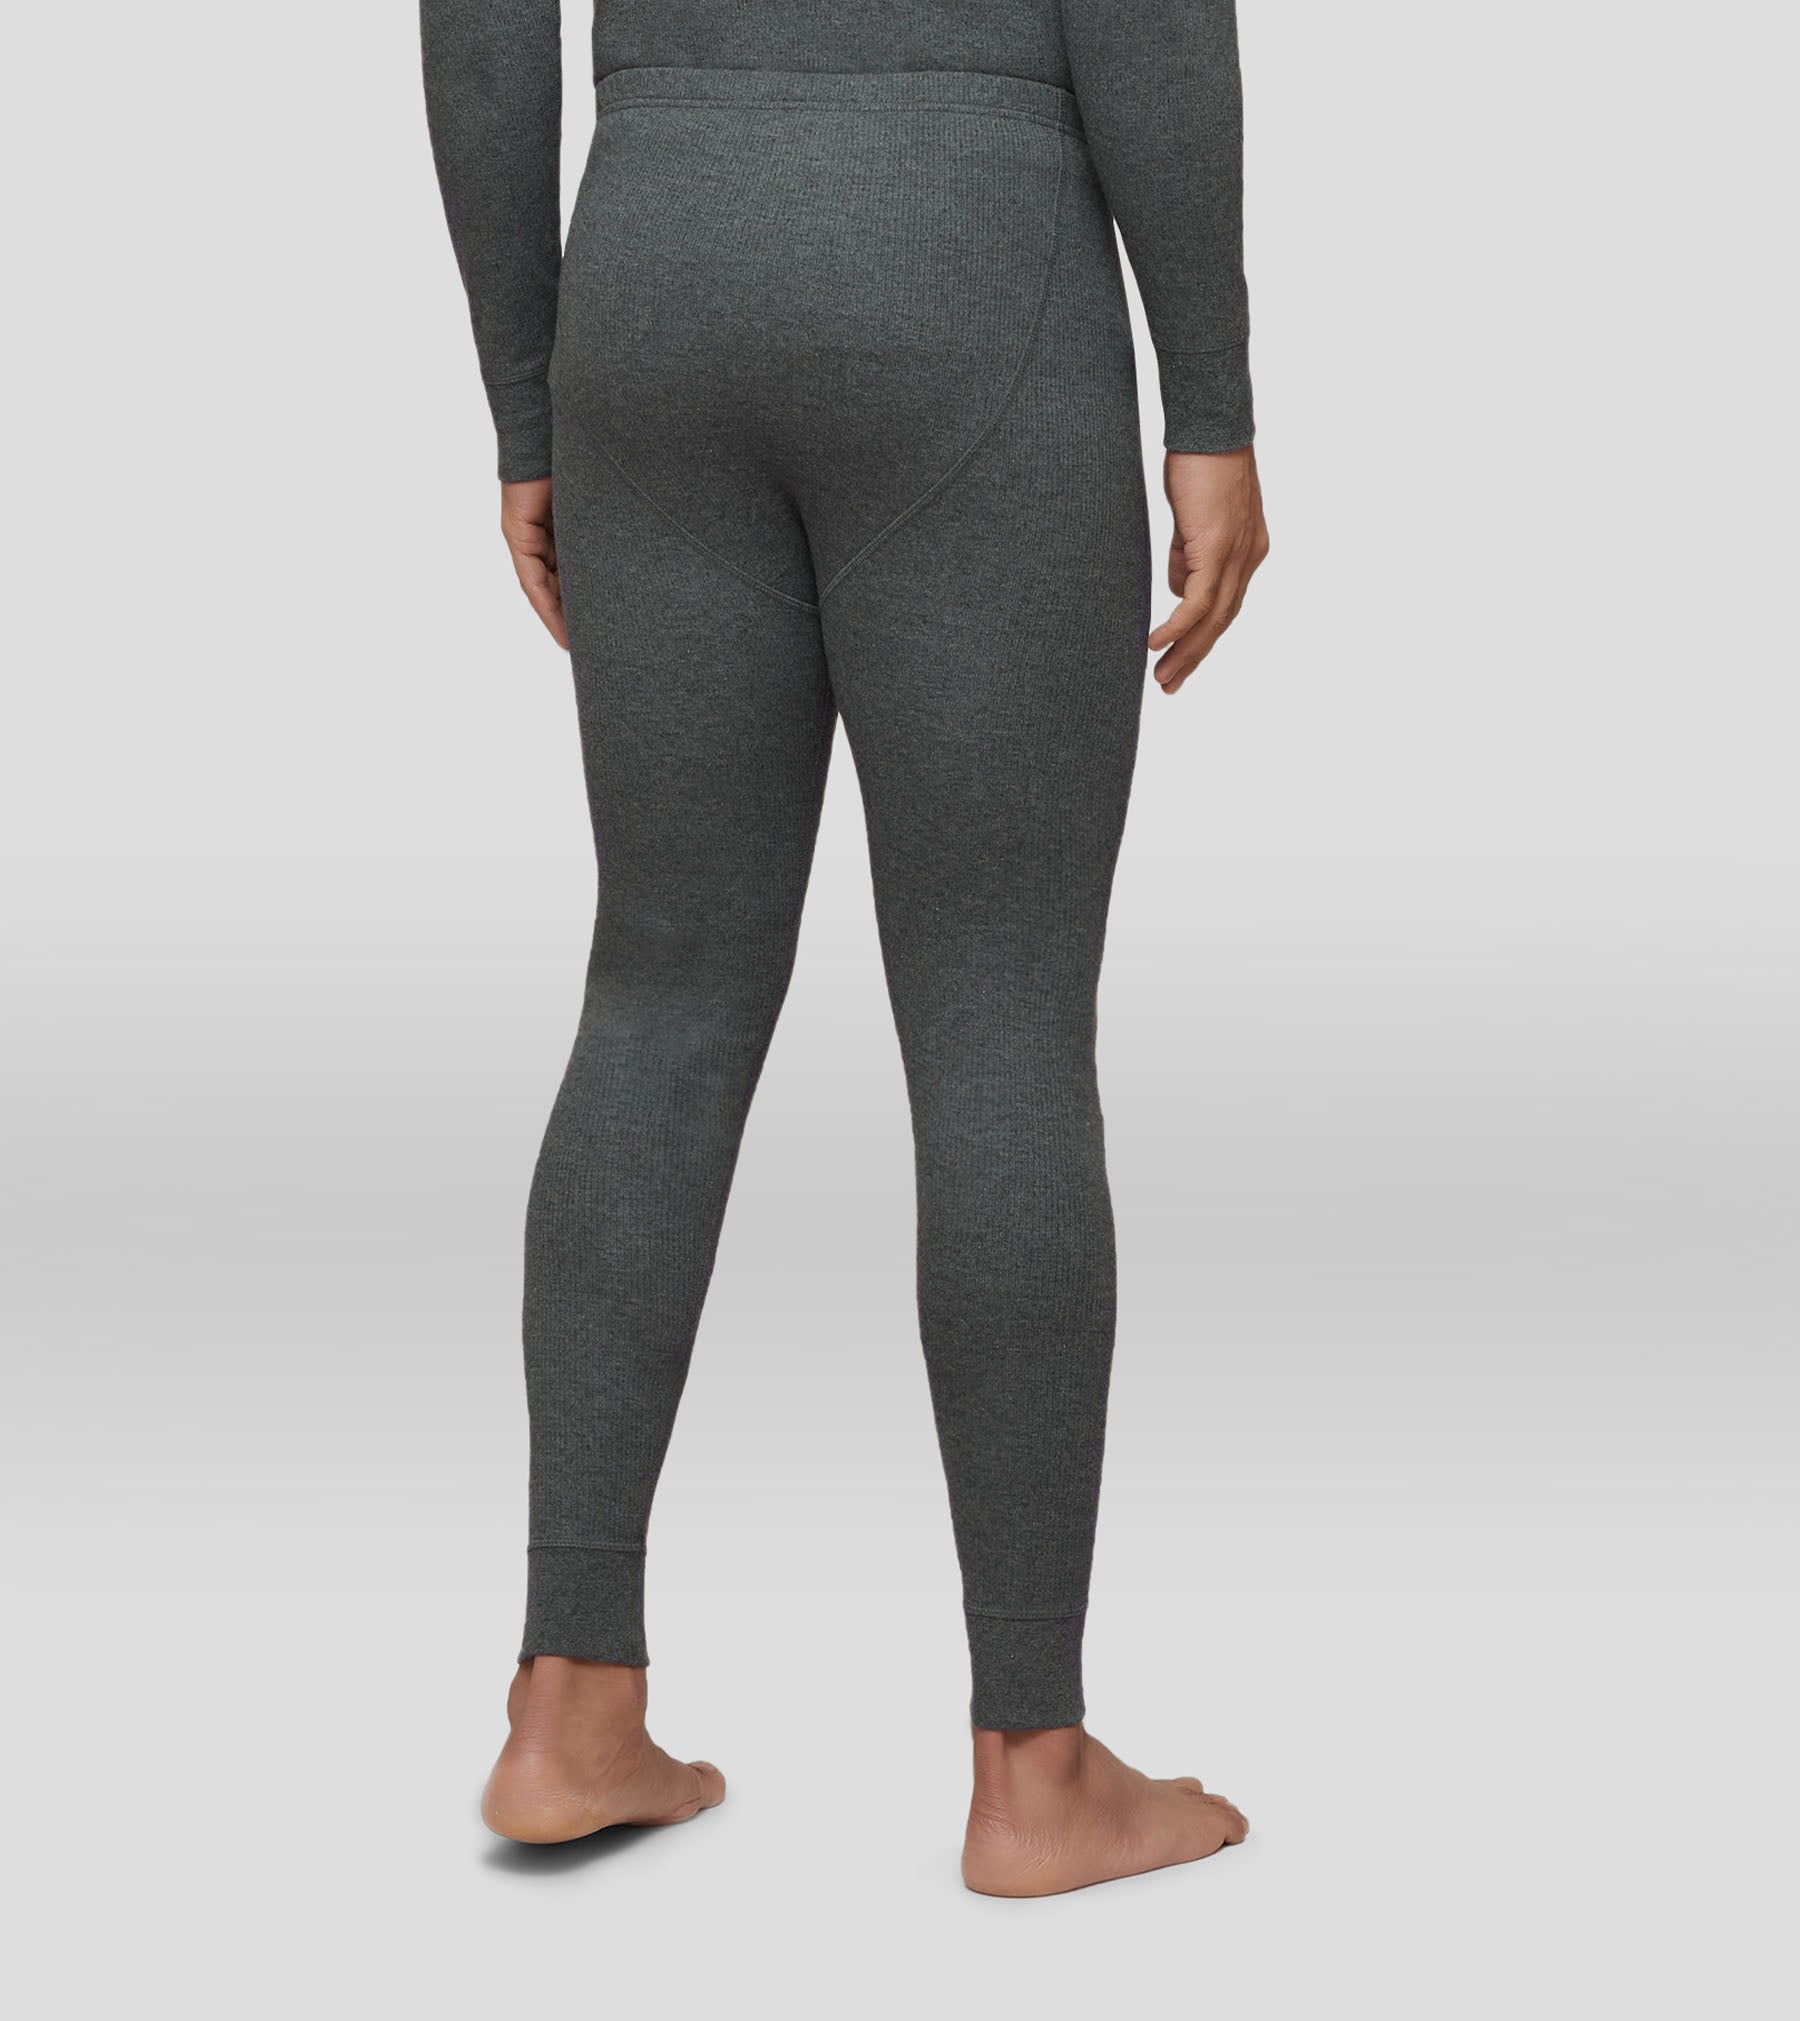 Cotton Rich Thermal Long Johns For Men Graphite Grey - XYXX Mens Apparels